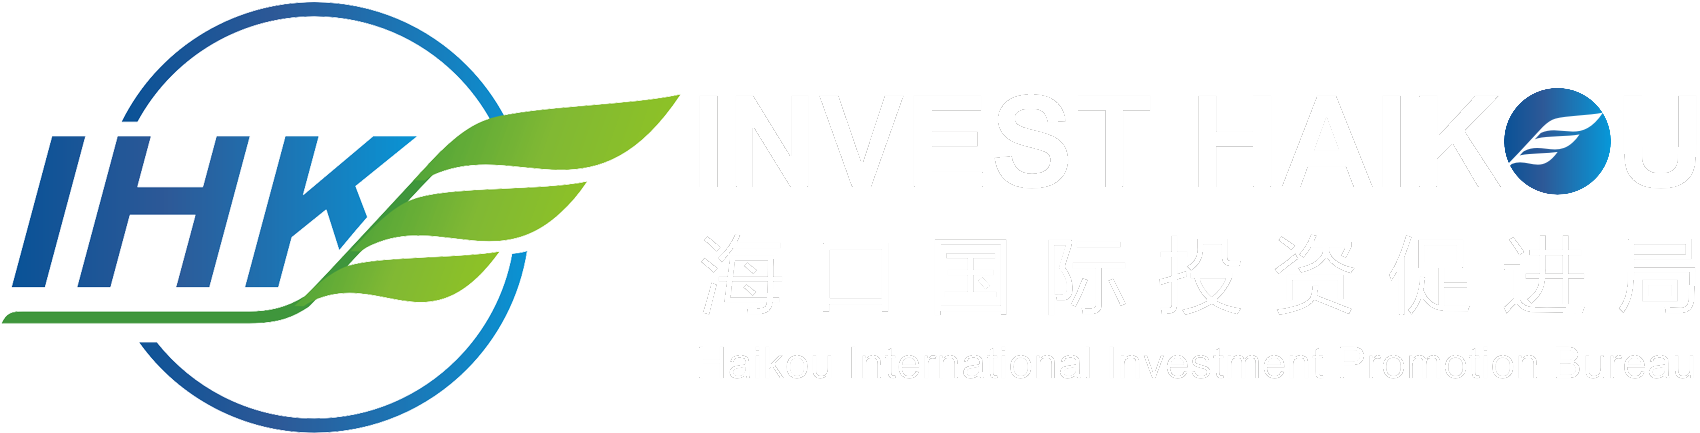 Invest in Haikou network